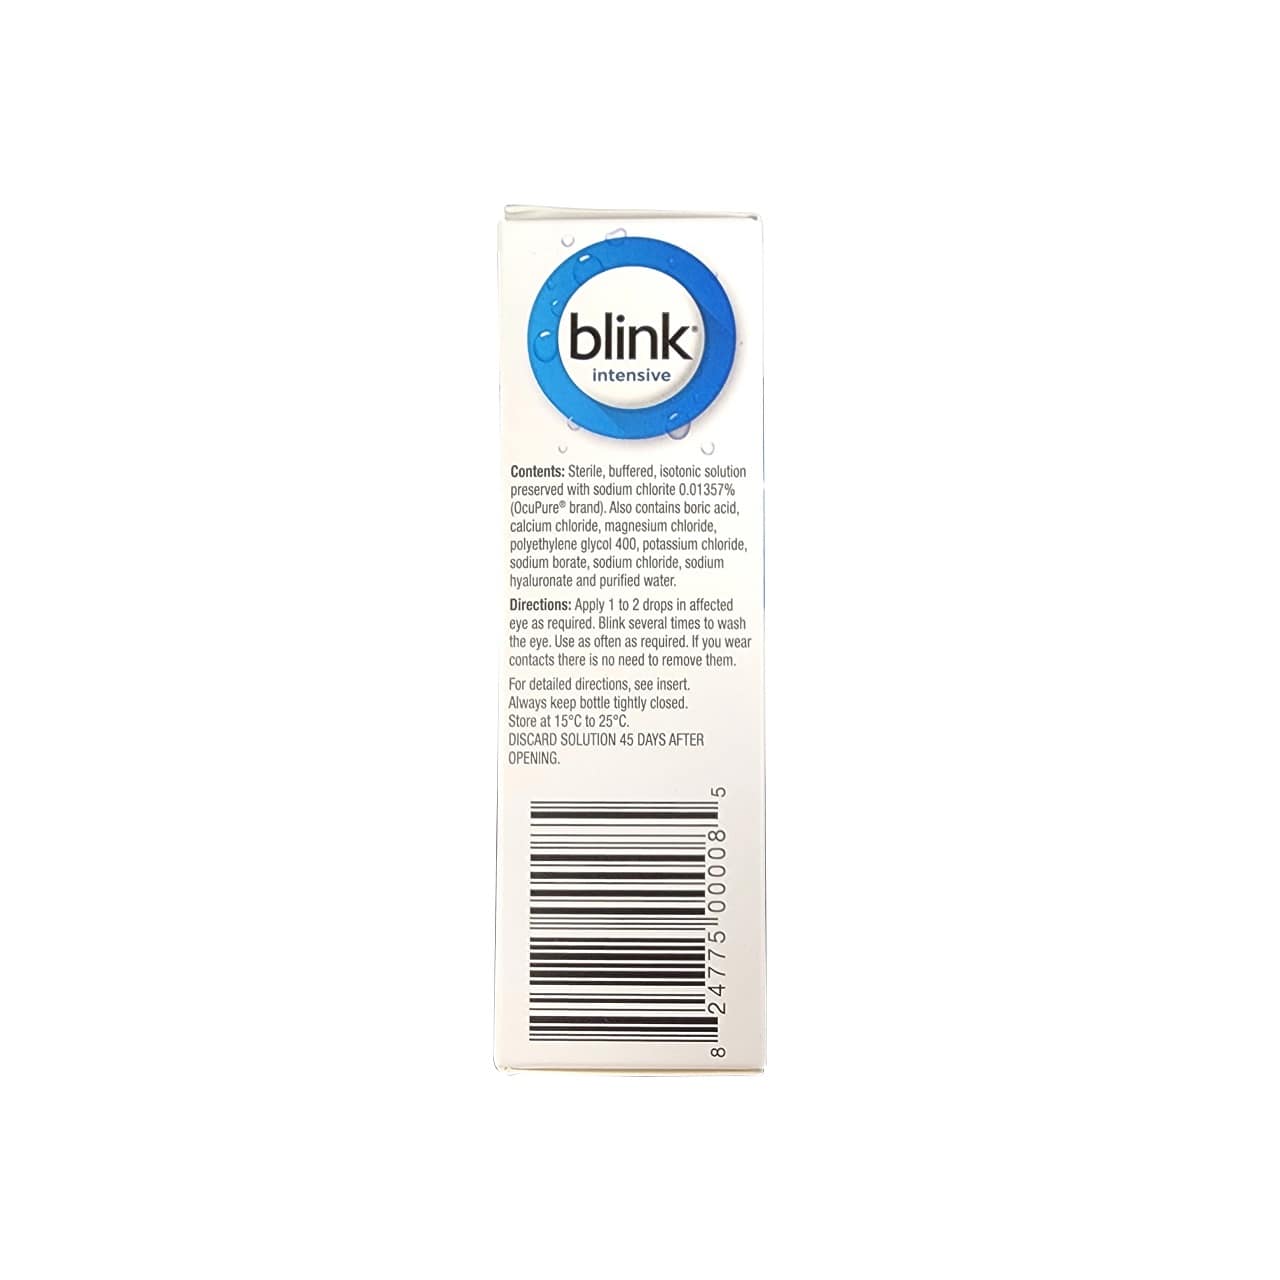 Ingredients and directions for Blink Intensive Lubricant Eye Drops Moderate-Severe for Dry Eye (10 mL) in English